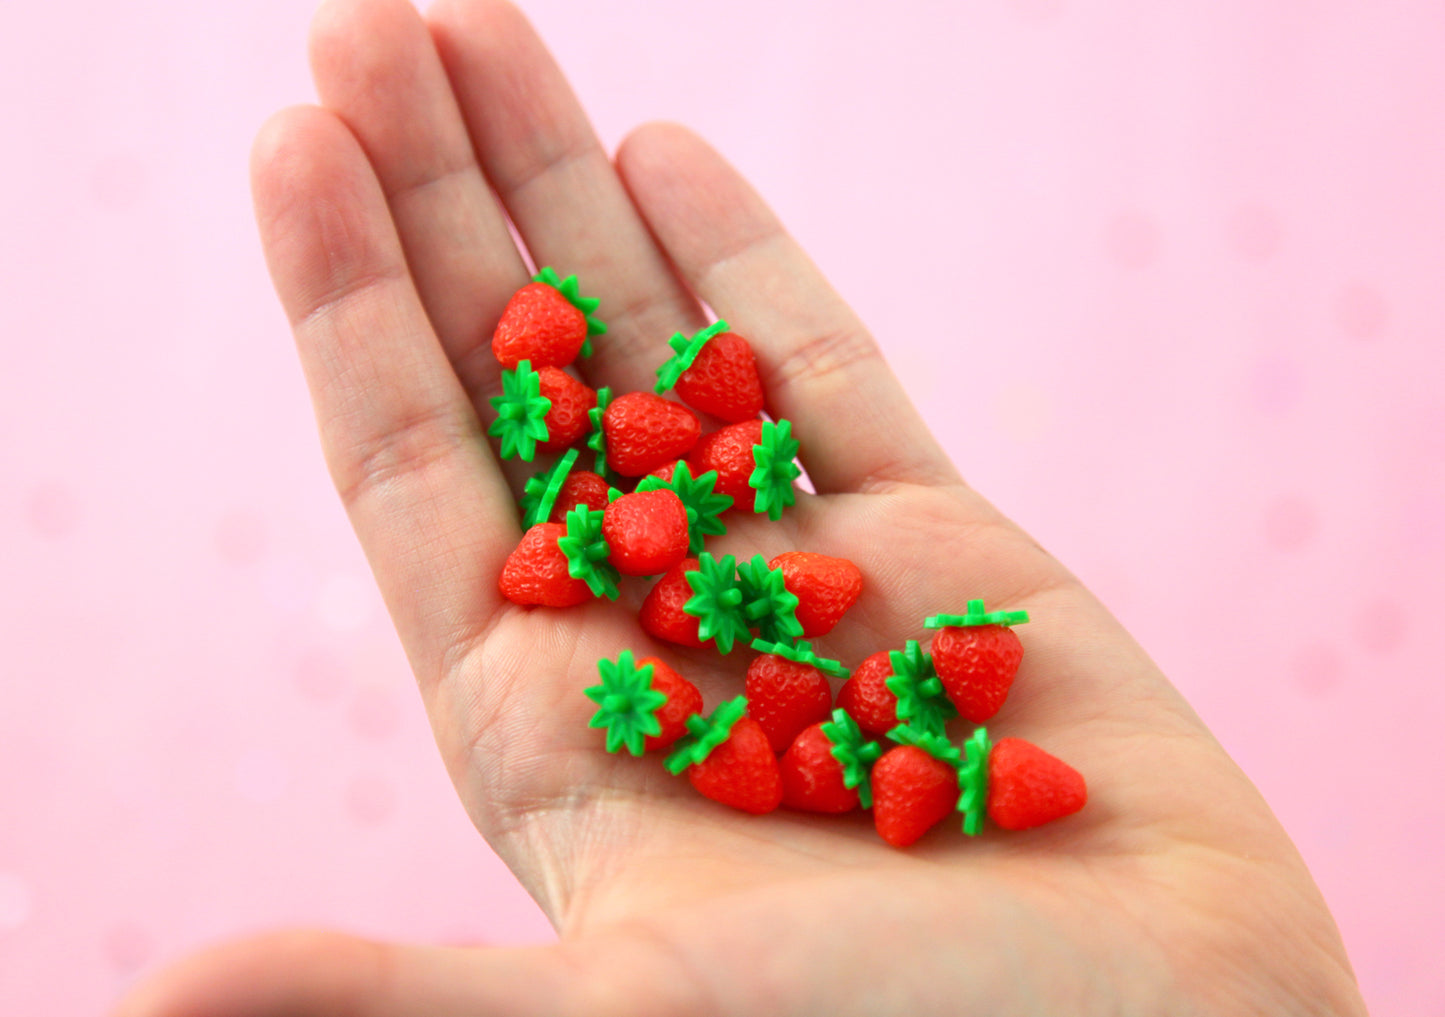 Fake Strawberries - 10mm Little Strawberry Soft Squishy Silicone Berry - 8 pc set